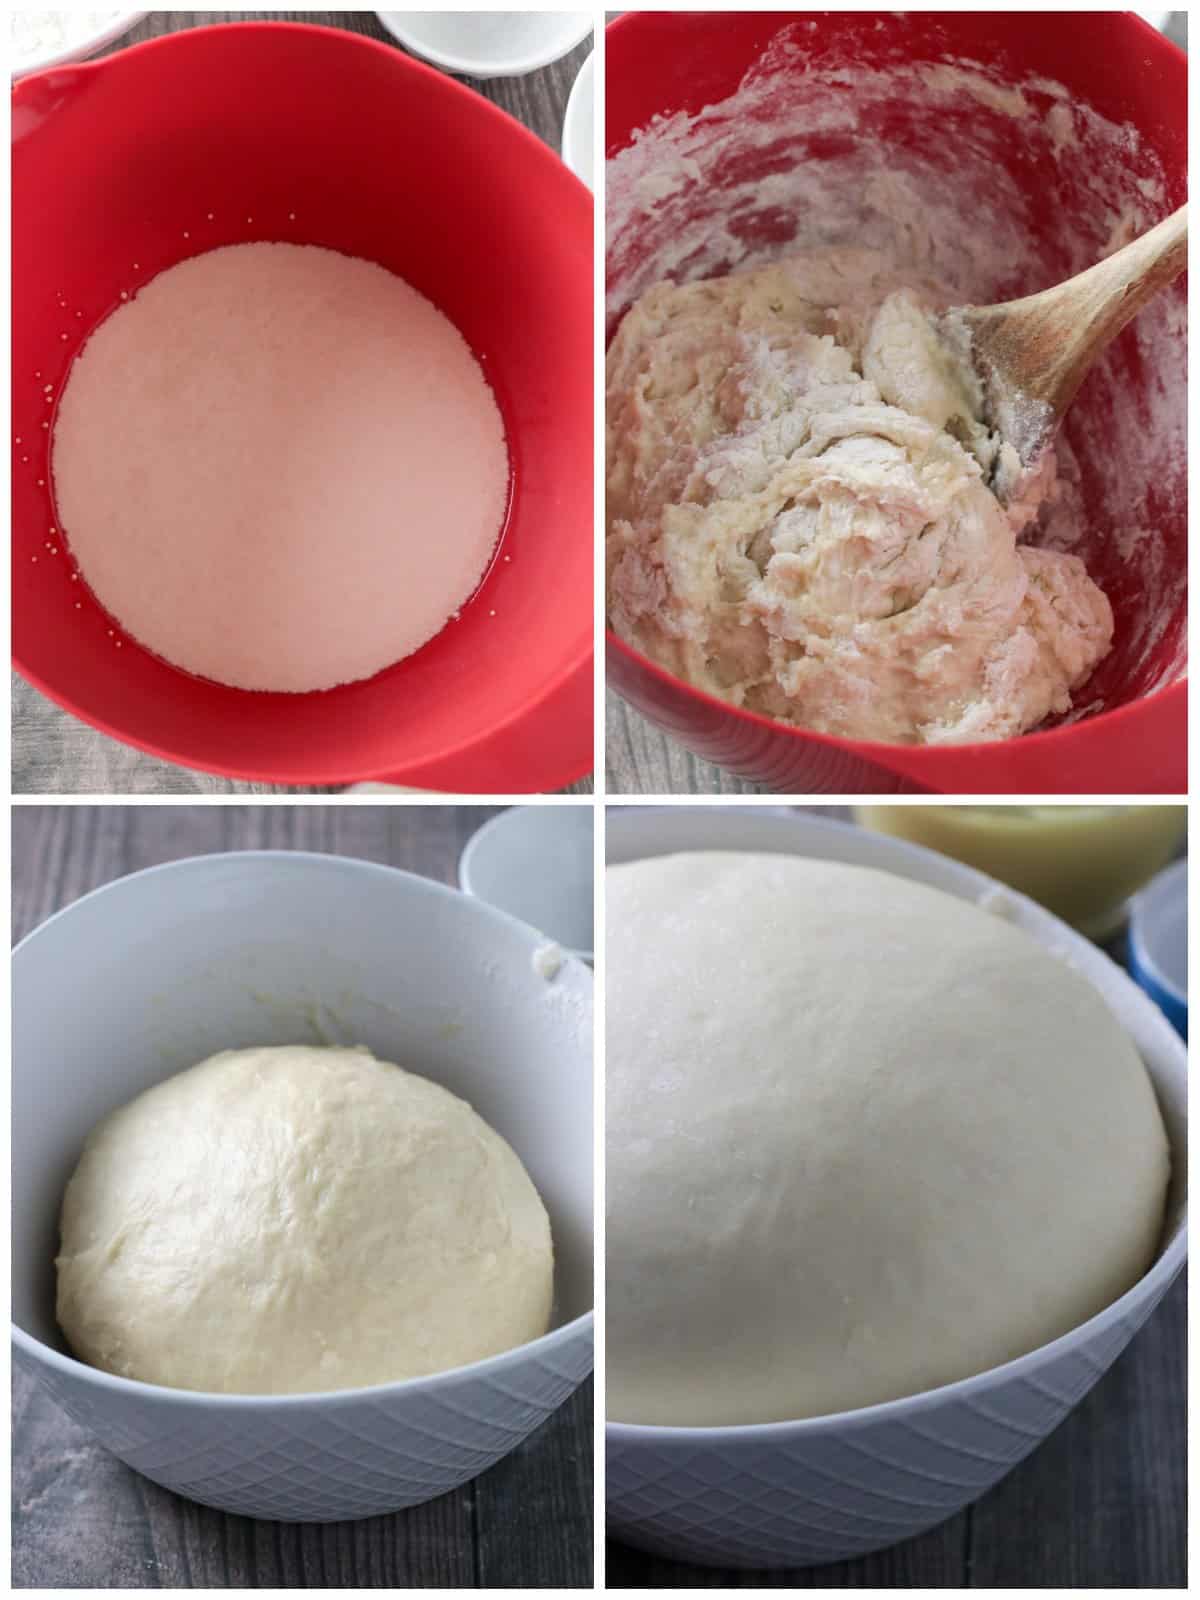 The process of making the donuts dough.